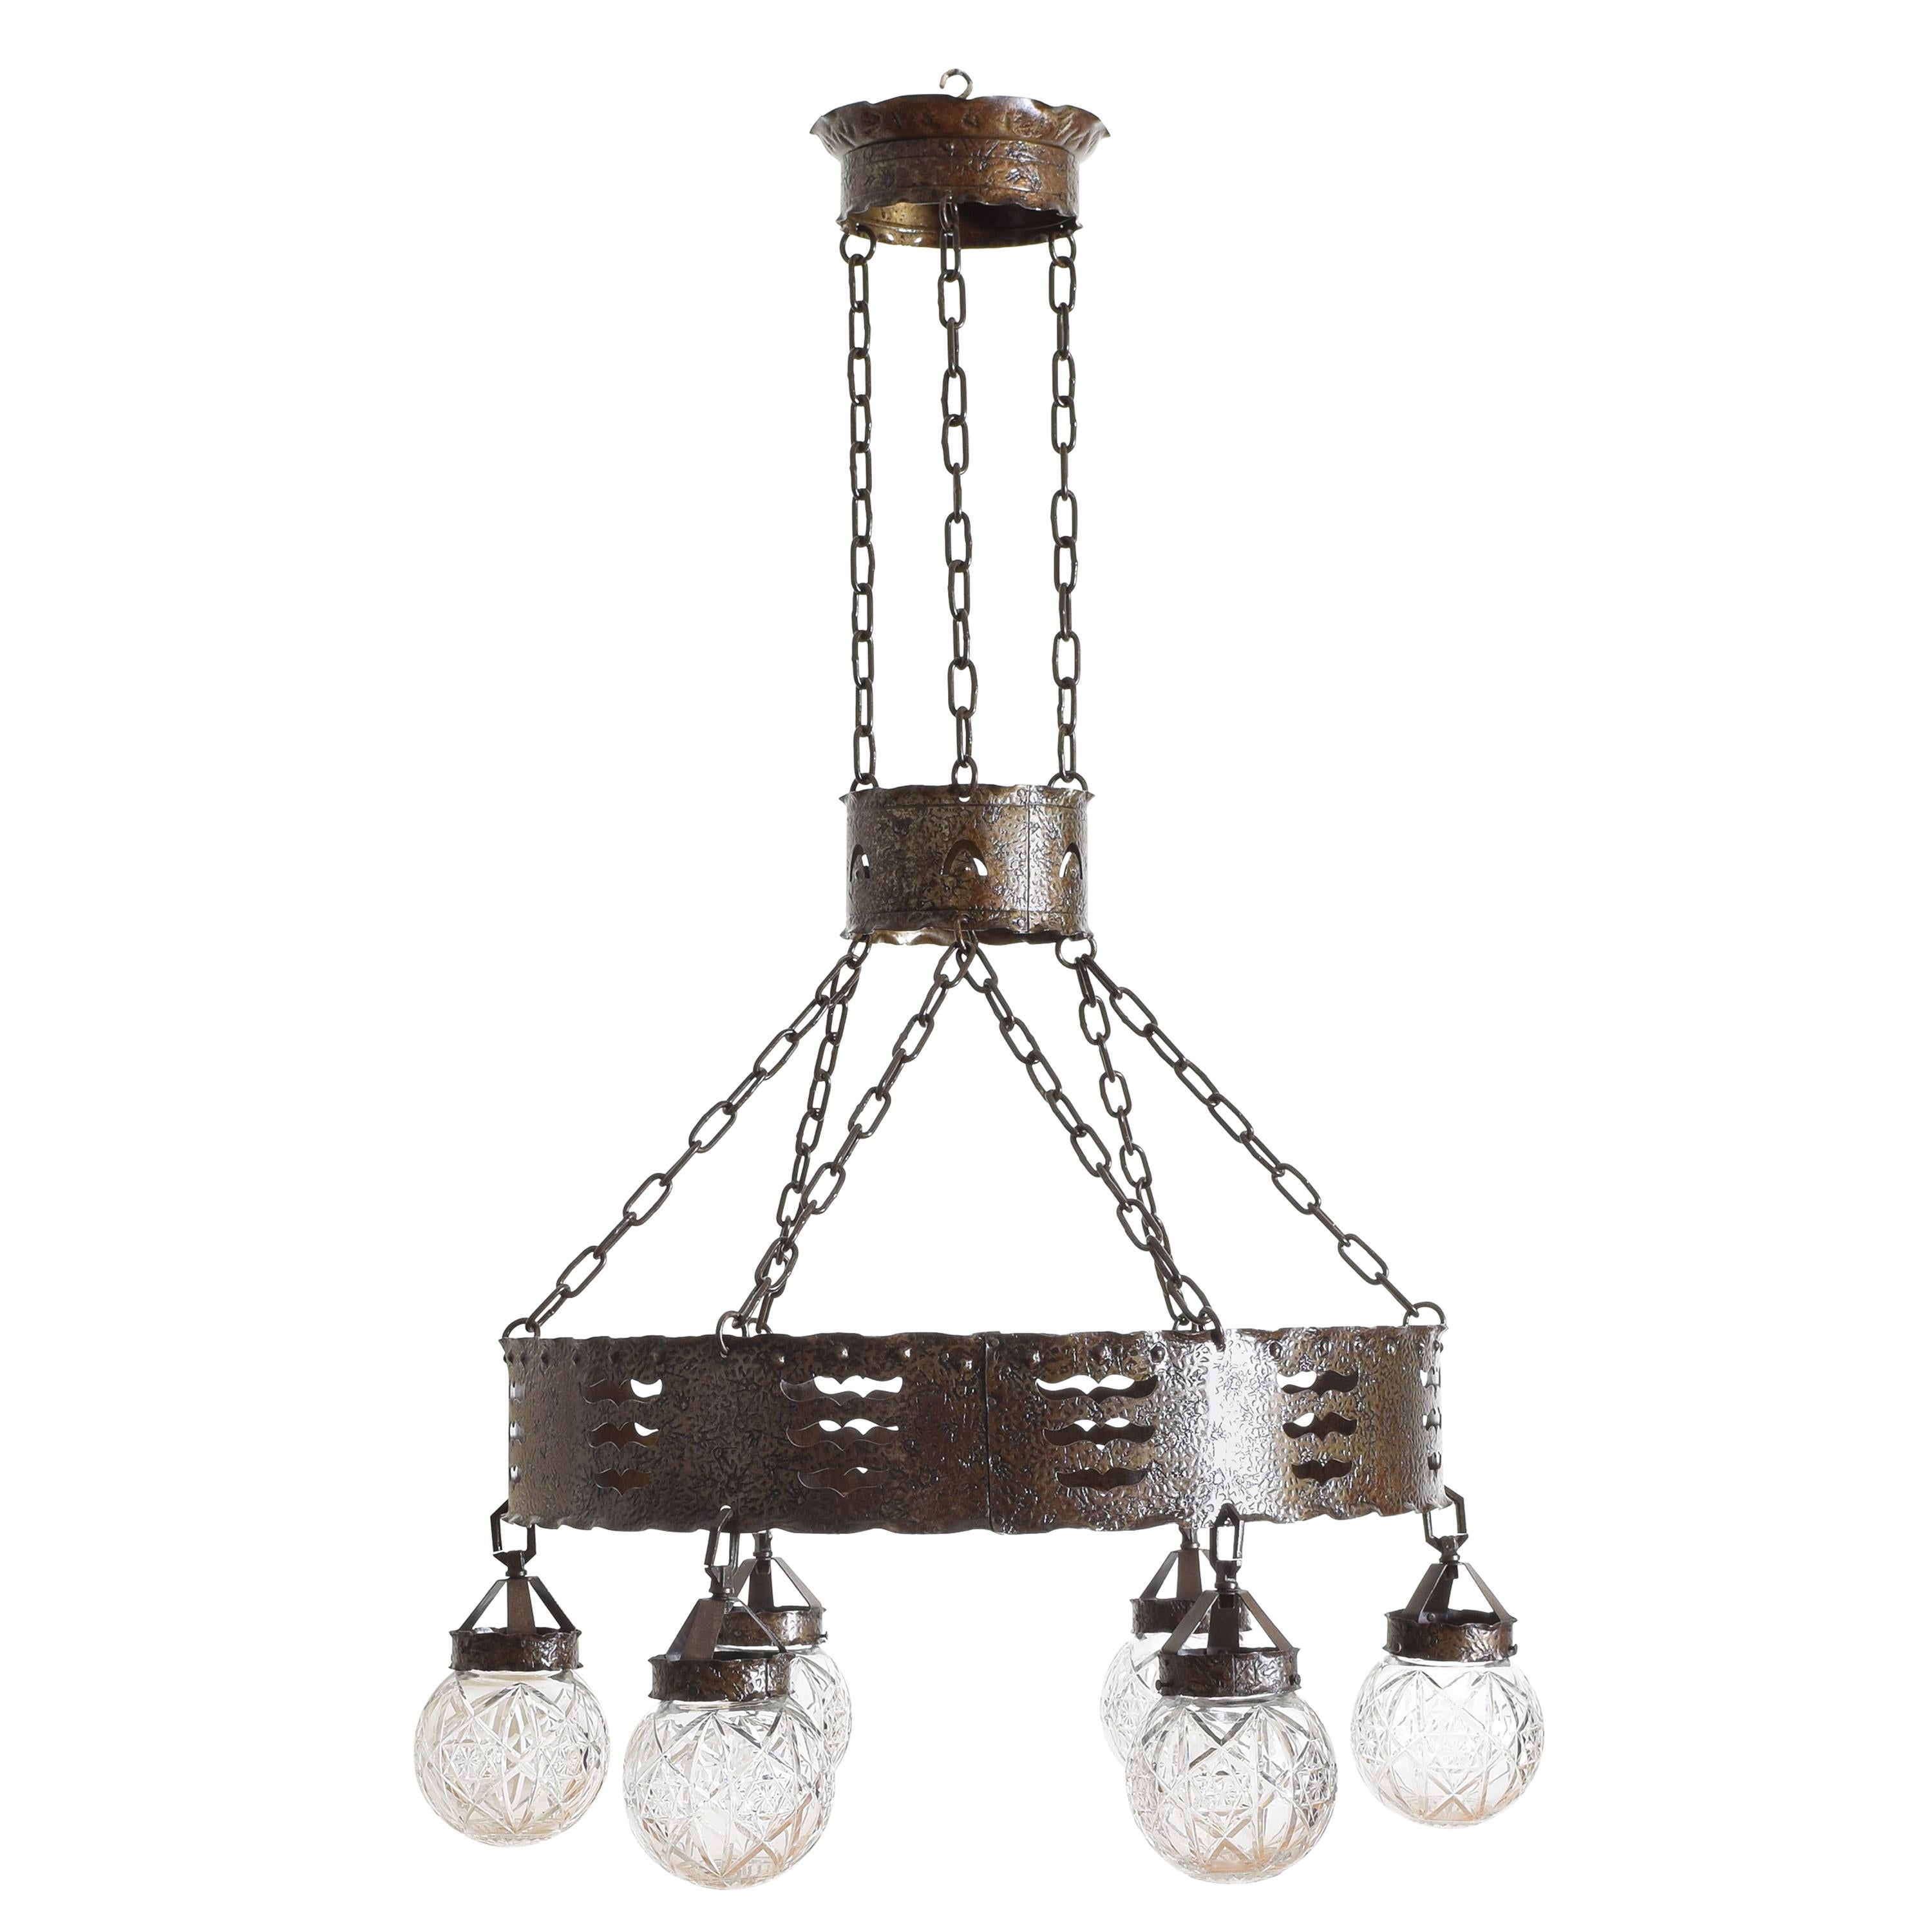 French Late Arts & Crafts Hammered Steel Chandelier, 6 Glass Globes